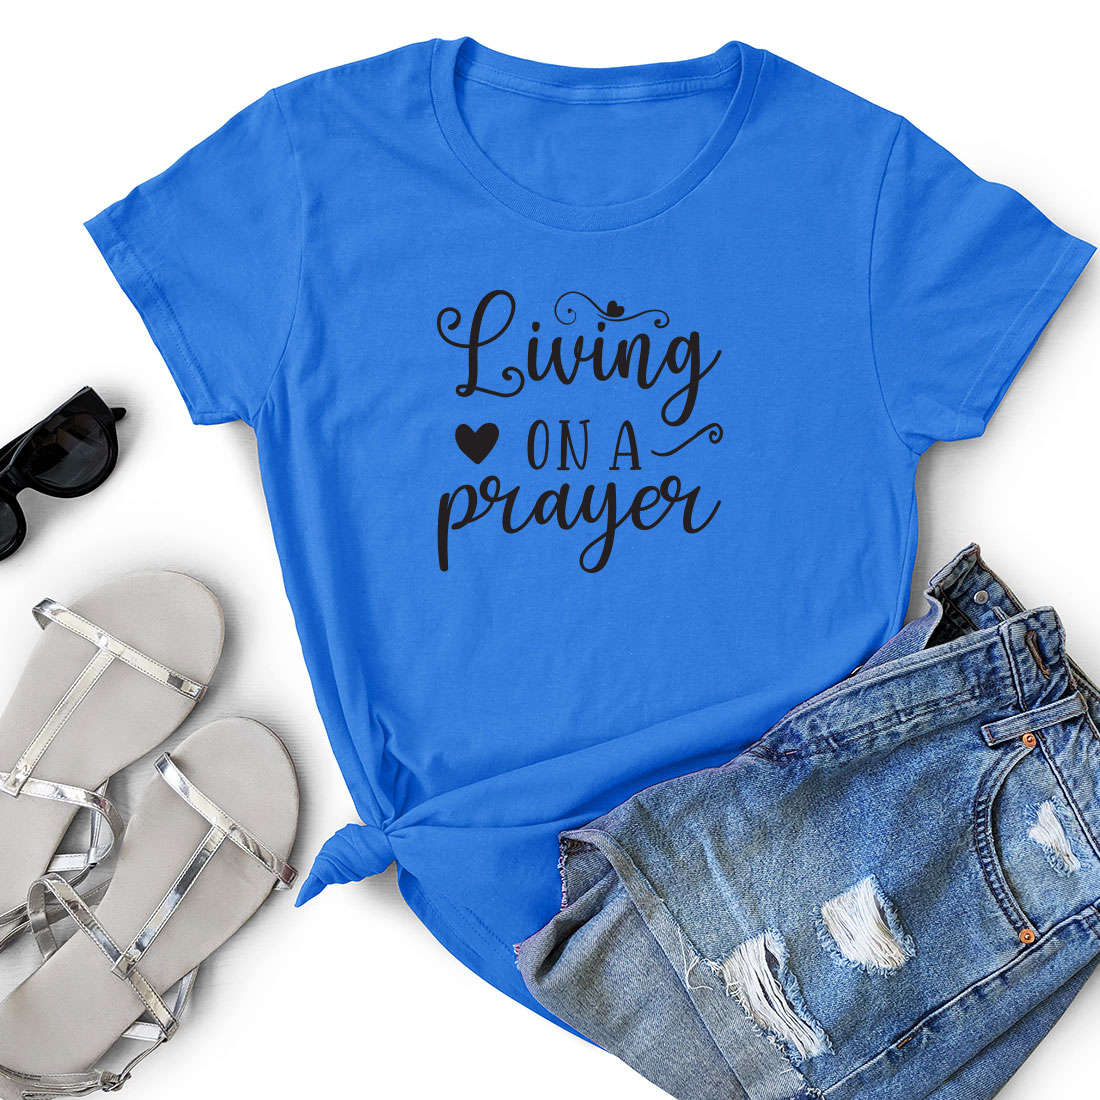 T - shirt that says living on a prayer next to a pair of shorts.